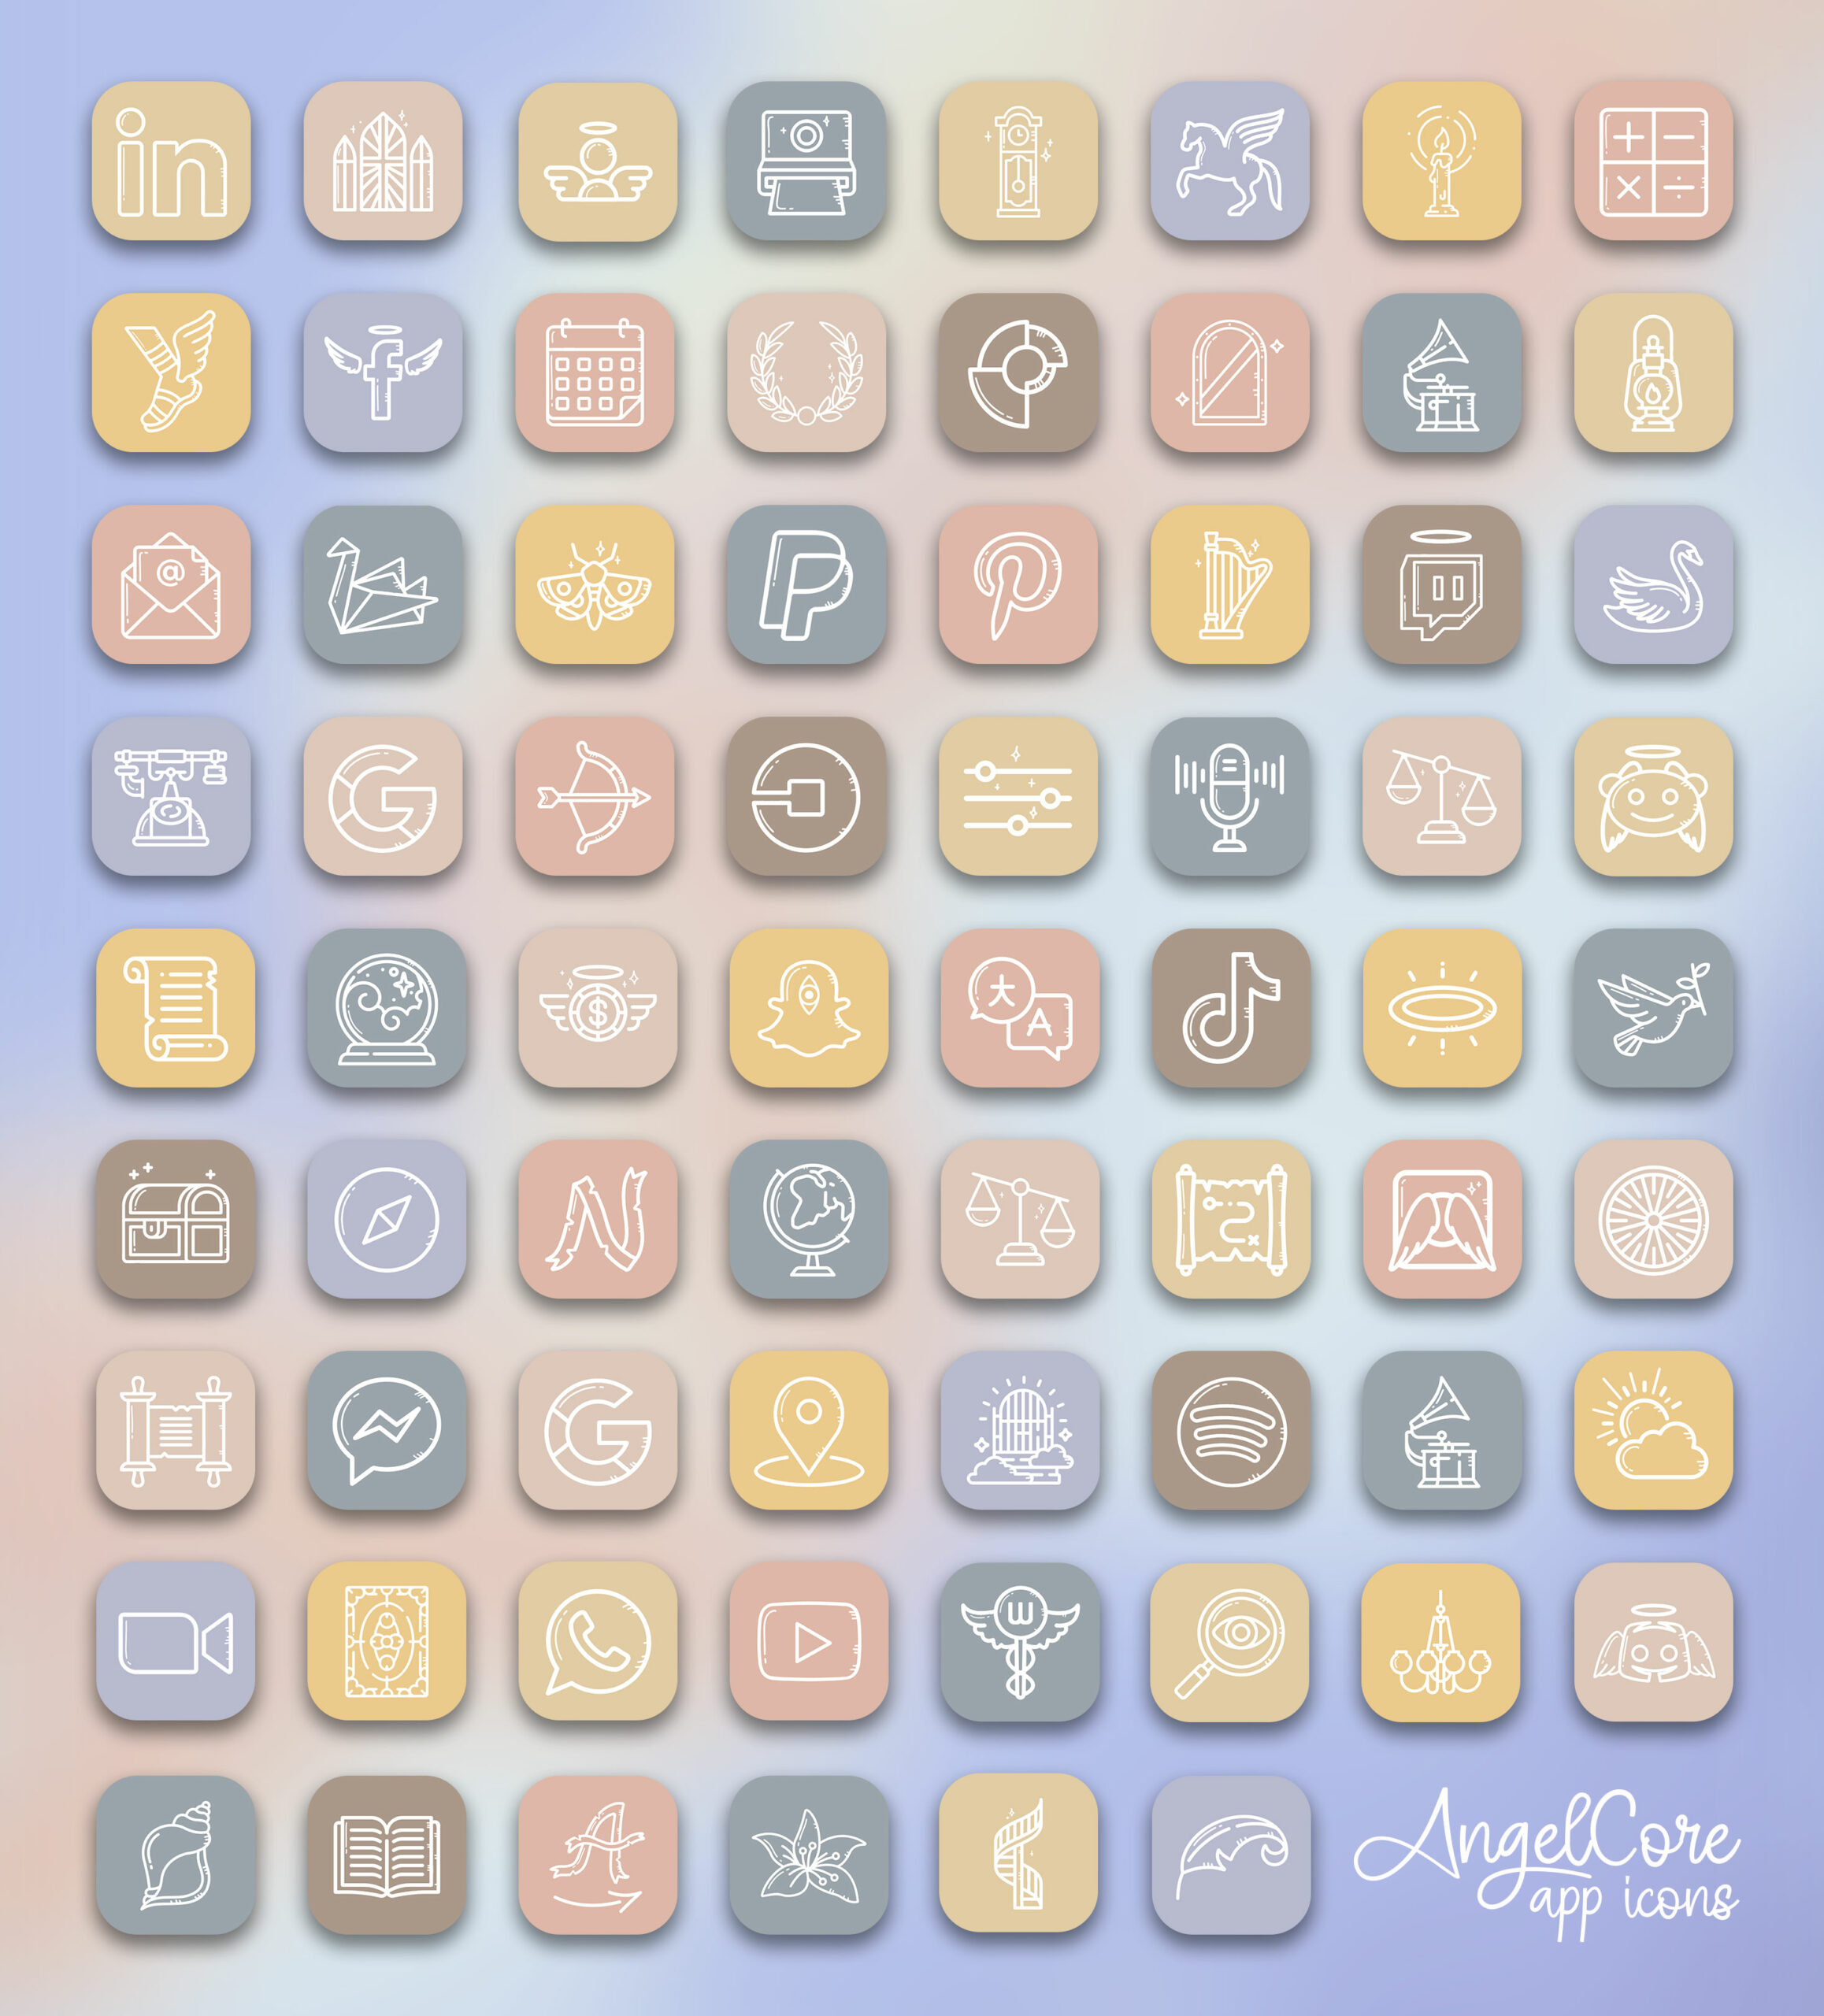 angelcore app icons pack preview 2